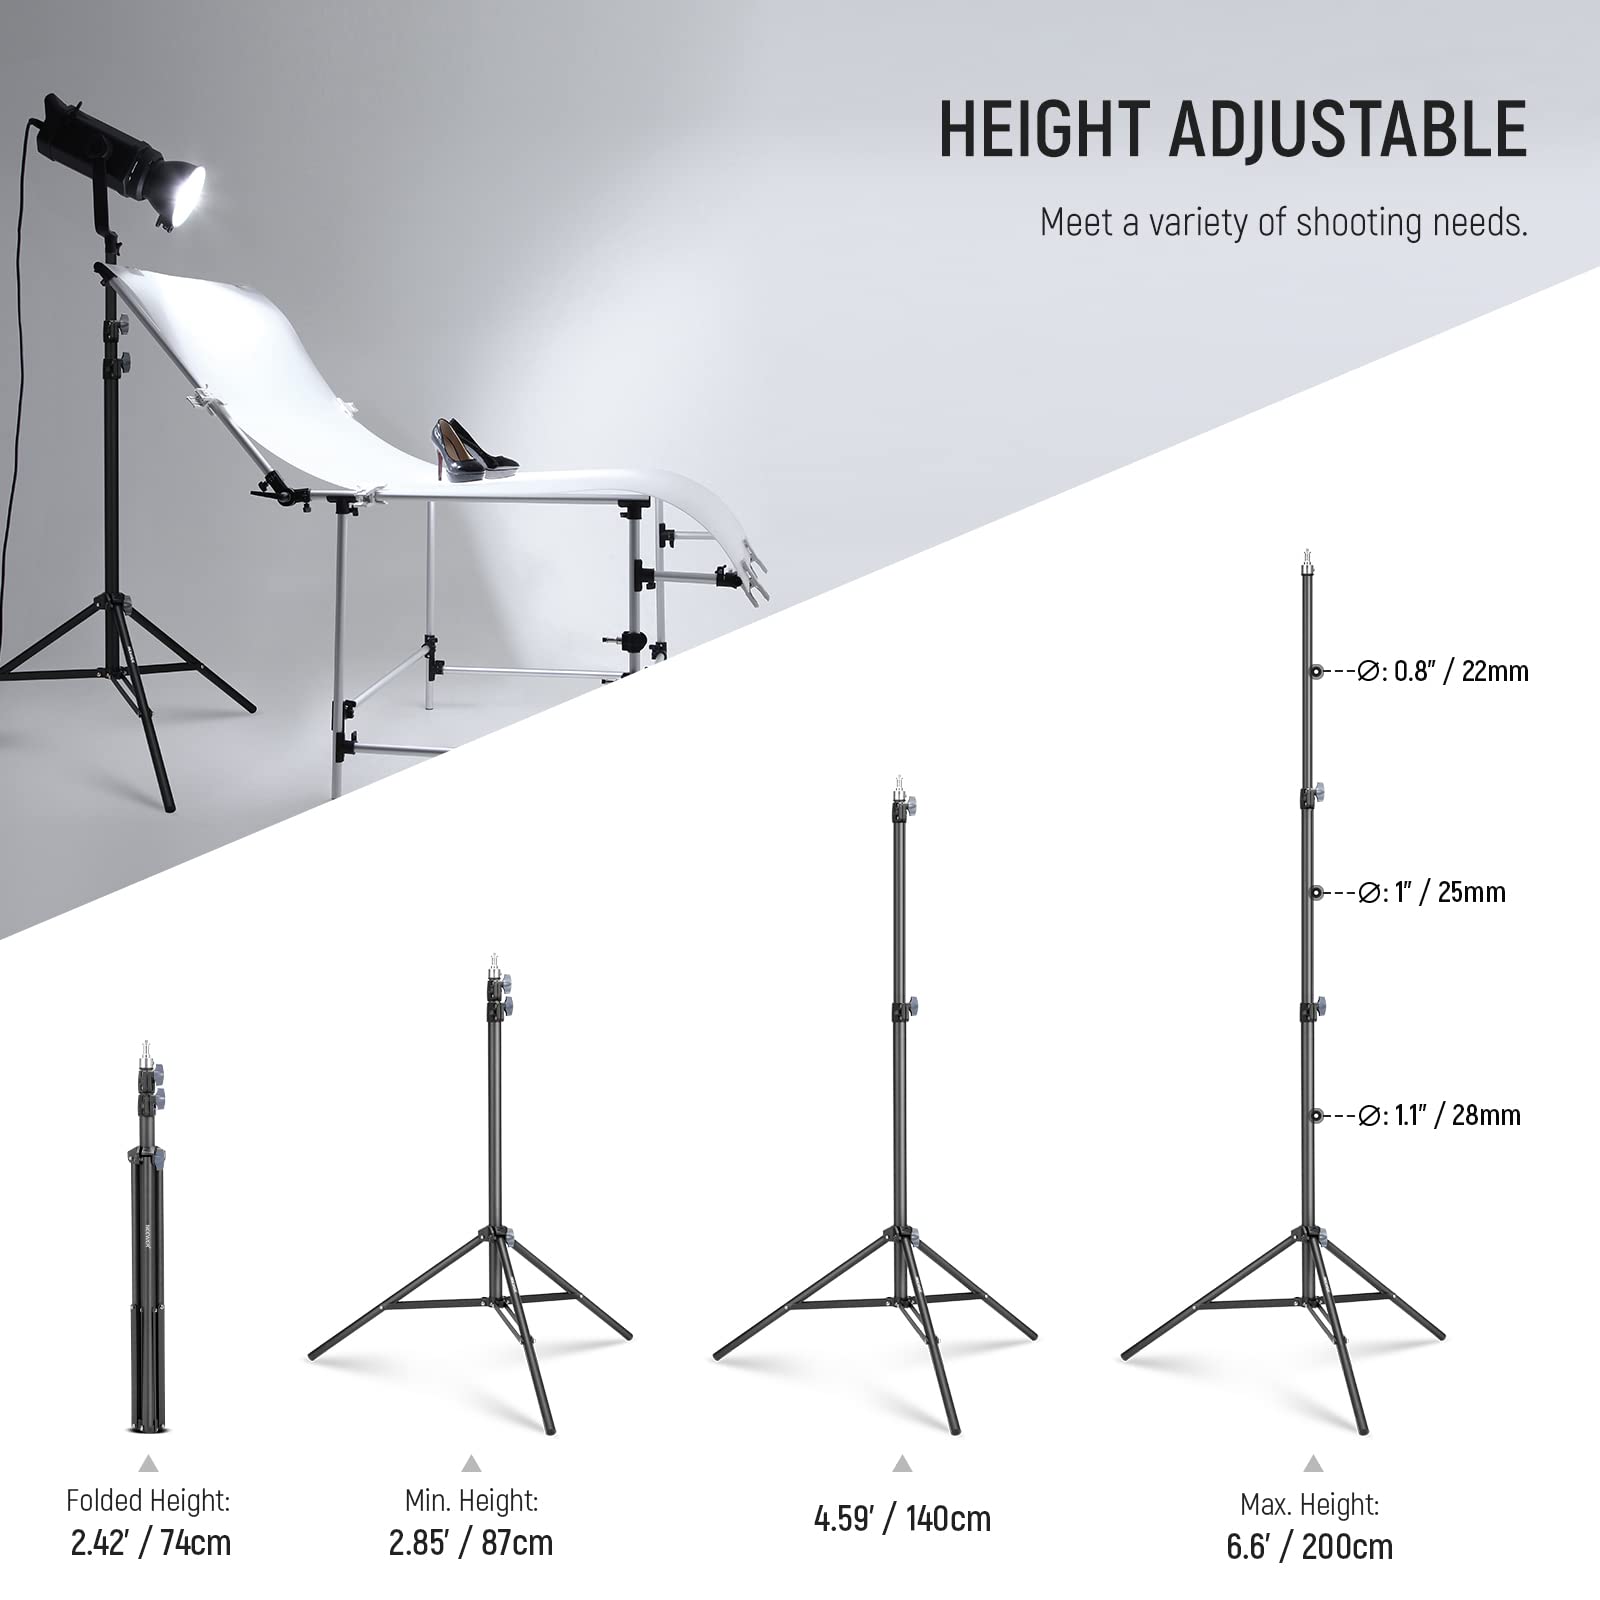 NEEWER Photography Light Stand 2.85-6.6ft/87-200cm, Spring Loaded Aluminum Tripod Stand with ø28mm Thicker Tube Diameter for Ring Light/LED Light/Strobe Flash/Softbox, Max Load 22lbs, ST-200